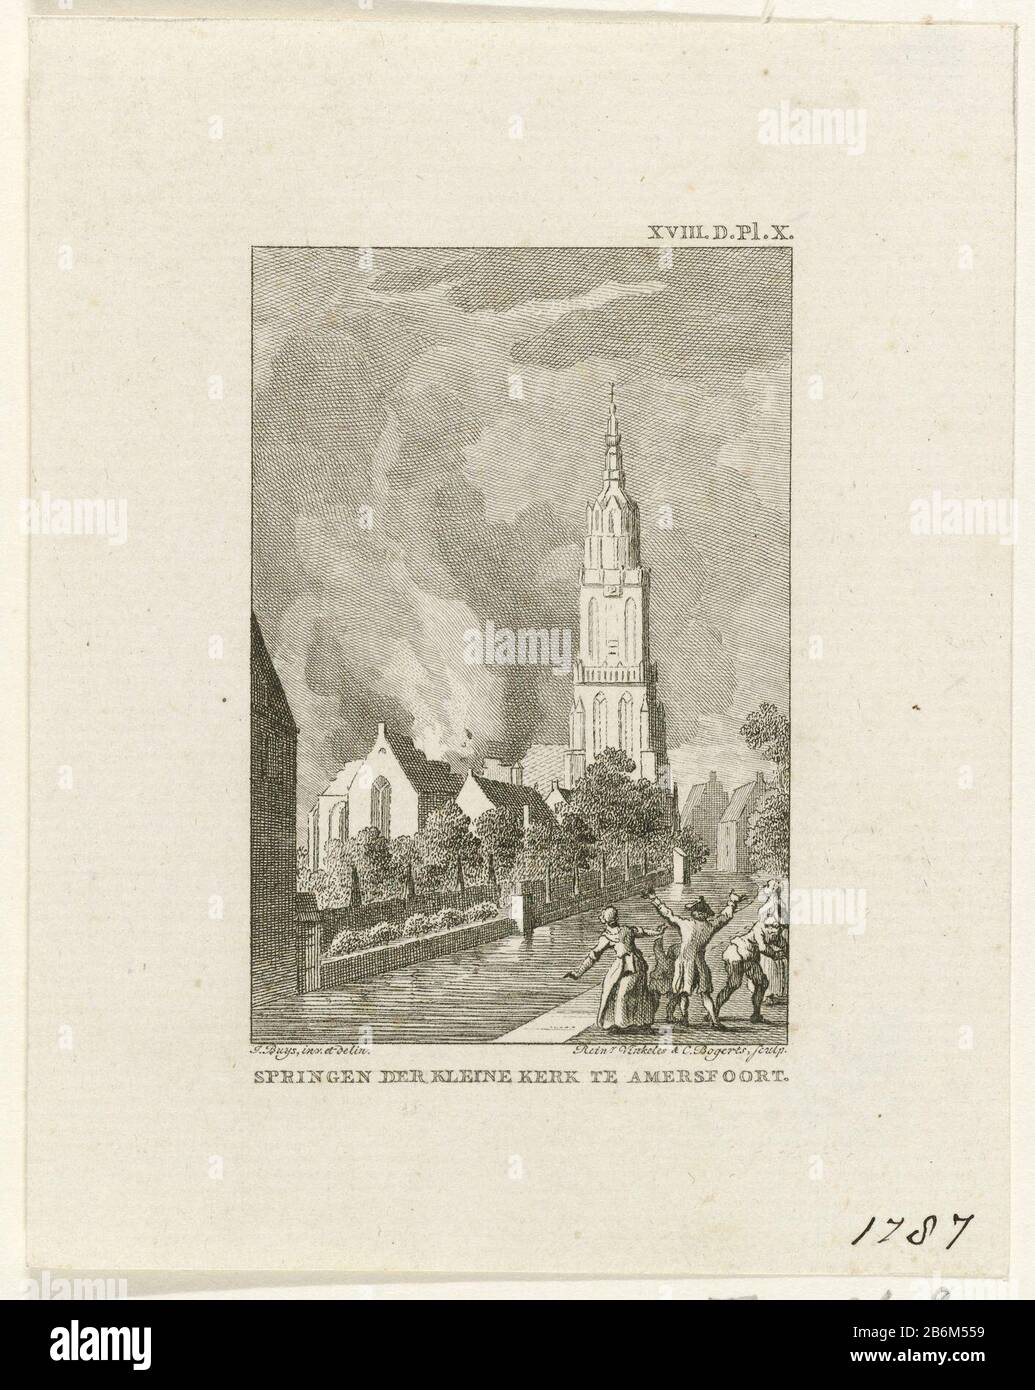 Explosie in de kerk van Amersfoort, 1787 Springen der kleine kerk te Amersfoort (titel op object) Gunpowder Explosion and fire in the Lady Chapel in Amersfoort, 2 August 1787. the church was destroyed, only the tower, Our Lady tower of Long John, remains upright. Signature top: XVIII.D.Pl.X. Manufacturer : print maker: Reinier Vinkeles (I) (shown on object) print maker: Cornelis Bogerts (indicated on object) to drawing of: Jacobus Buys (indicated on object) publisher: John manufacture AllartPlaats : Amsterdam Date: 1792 Physical characteristics: etching and engra material: paper Technique: etc Stock Photo